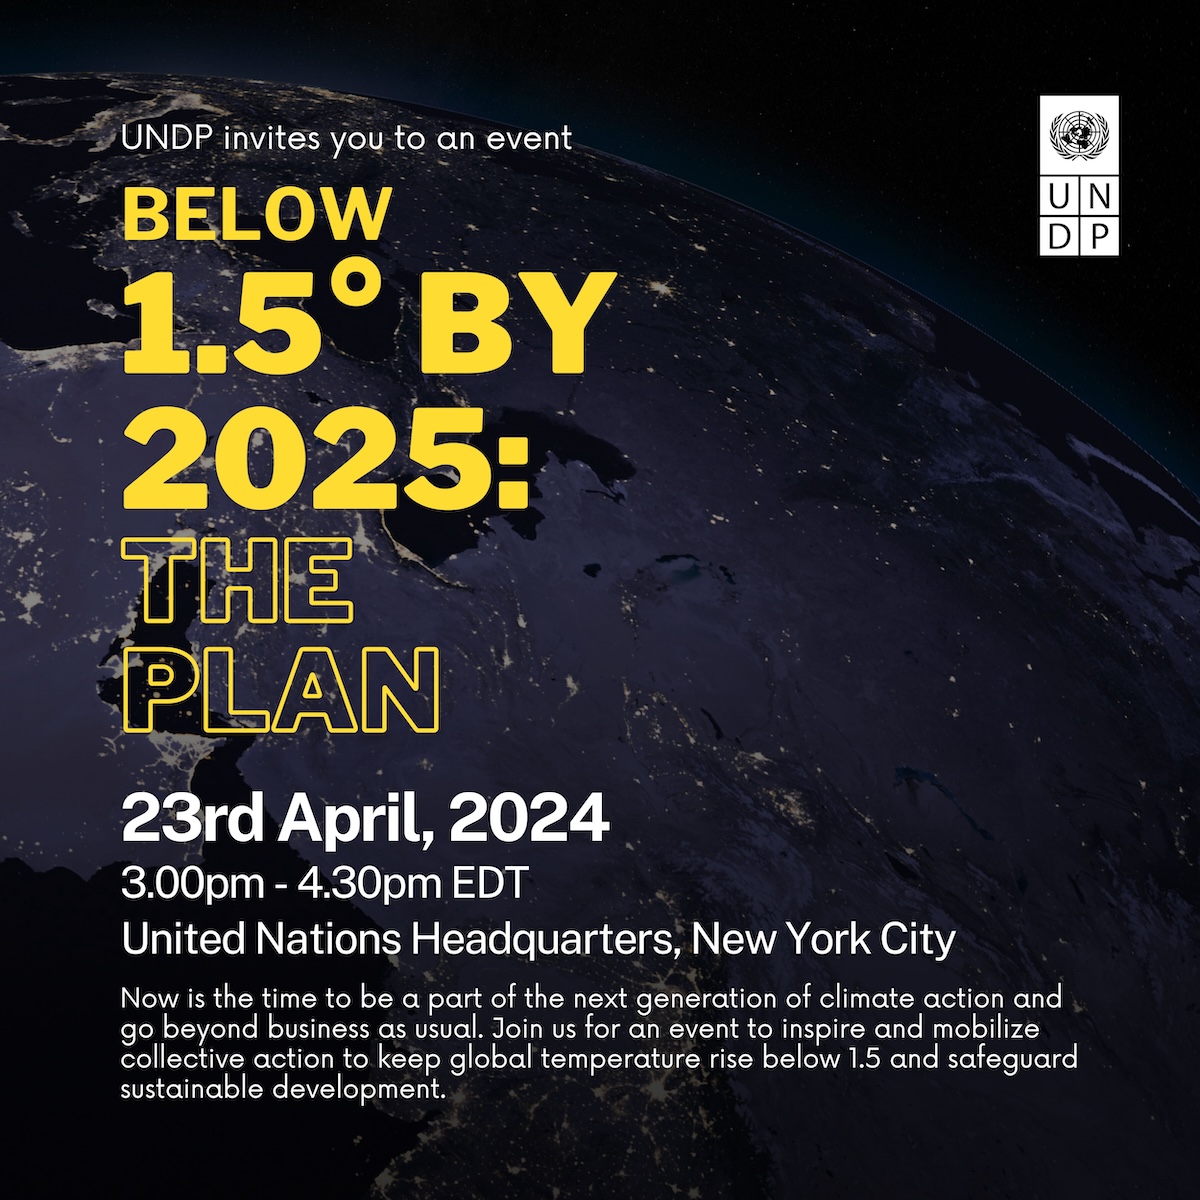 Today, @UNDP will unveil #ClimatePromise 2025. Join @antonioguterres, @ASteiner, @cassie_flynn & more to inspire collective action to keep global warming to 1.5°C & safeguard sustainable development. Watch live now: bit.ly/3UnSrFT